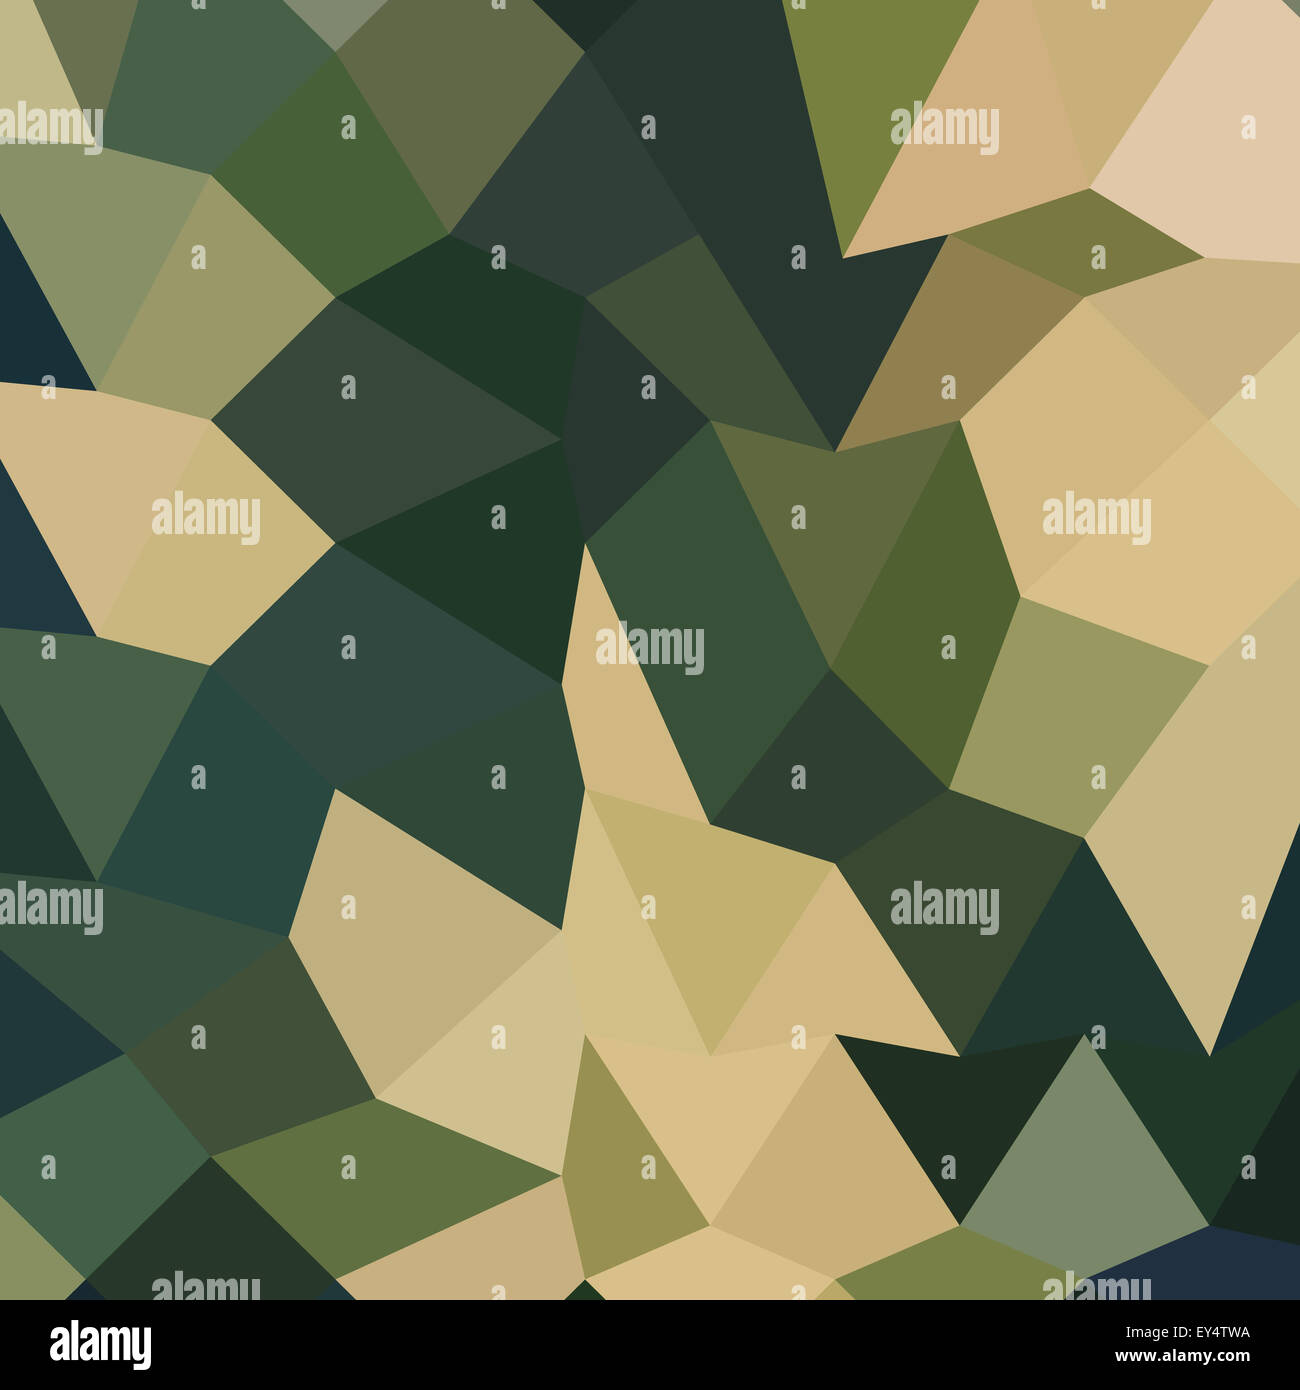 Low polygon style illustration of a dark olive green abstract geometric background. Stock Photo